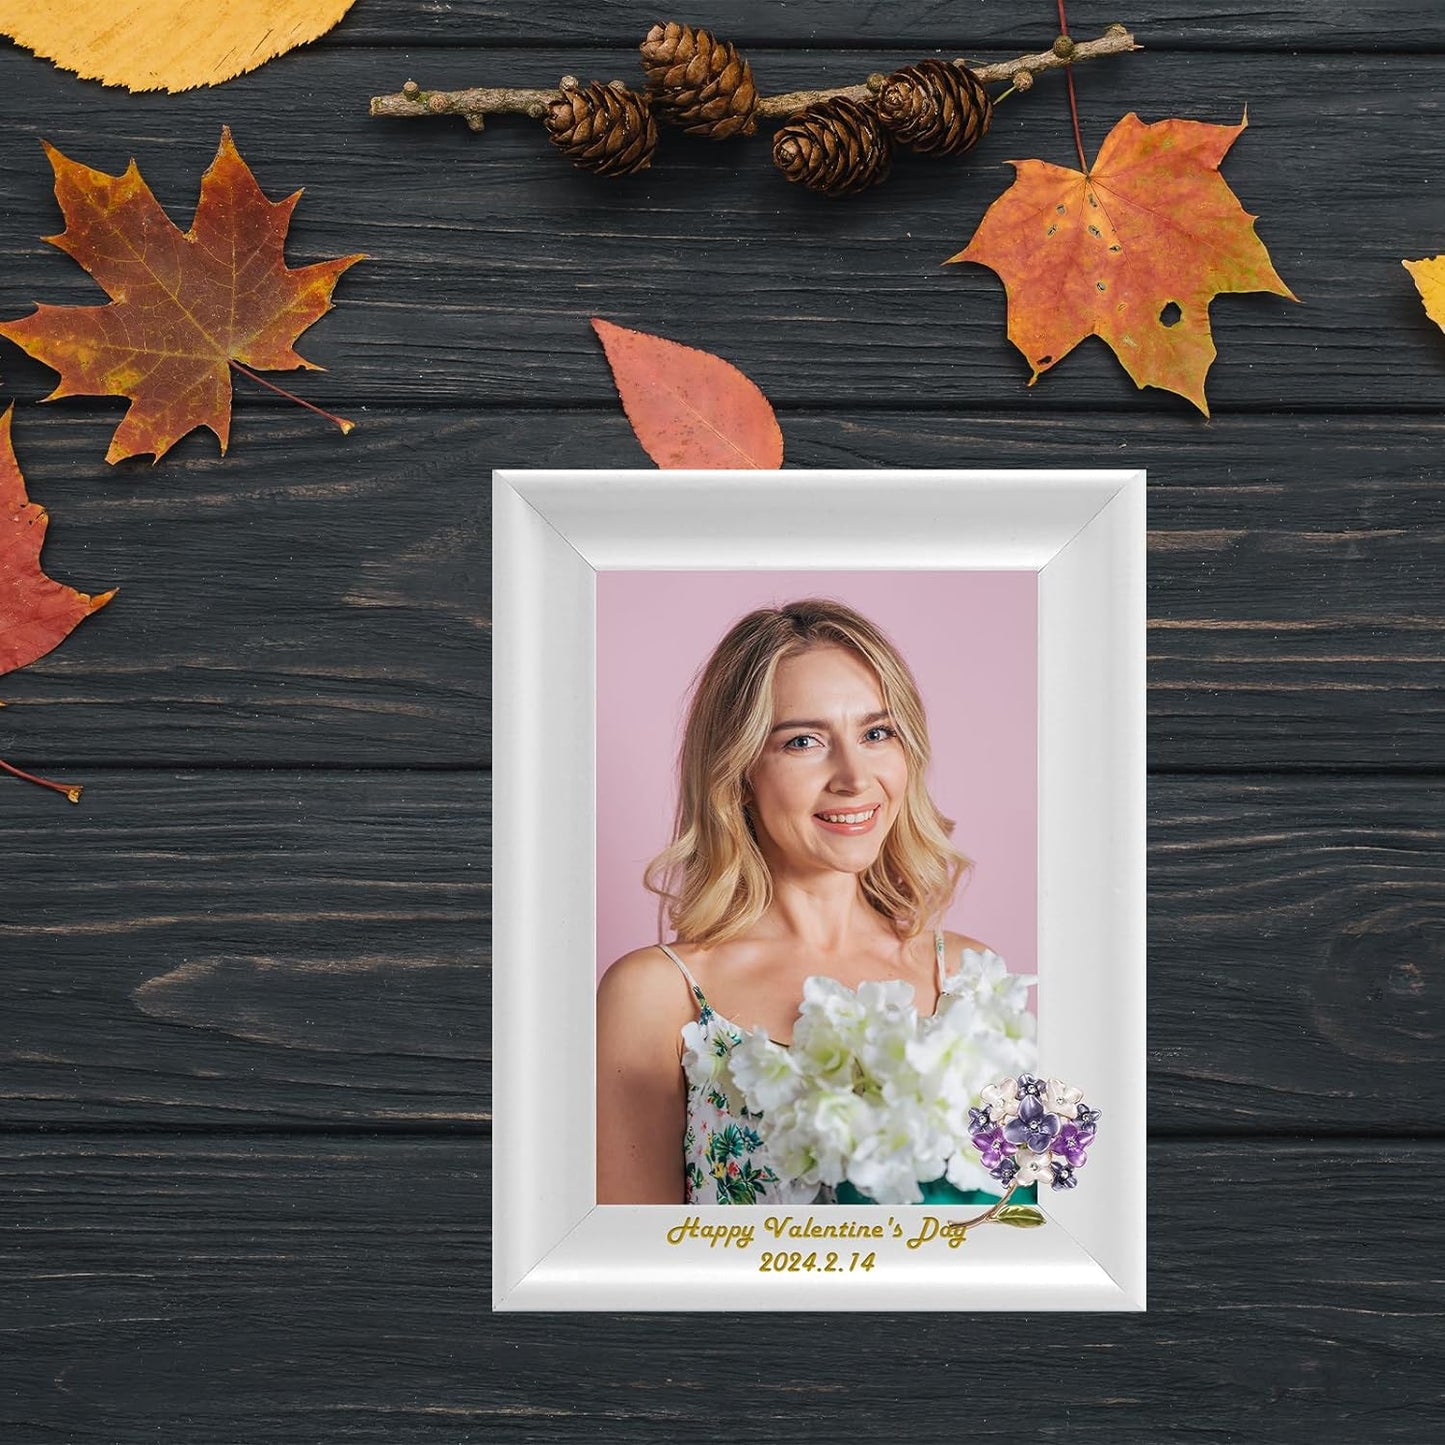 Decoration Ideas For Photo Frames Dotride Custom Picture Frame with a Flower Decoration, Wood Photo Frame with Custom Wooden Carving, Can be engraved with any text you want, suitable for Valentine's Day, Flowers